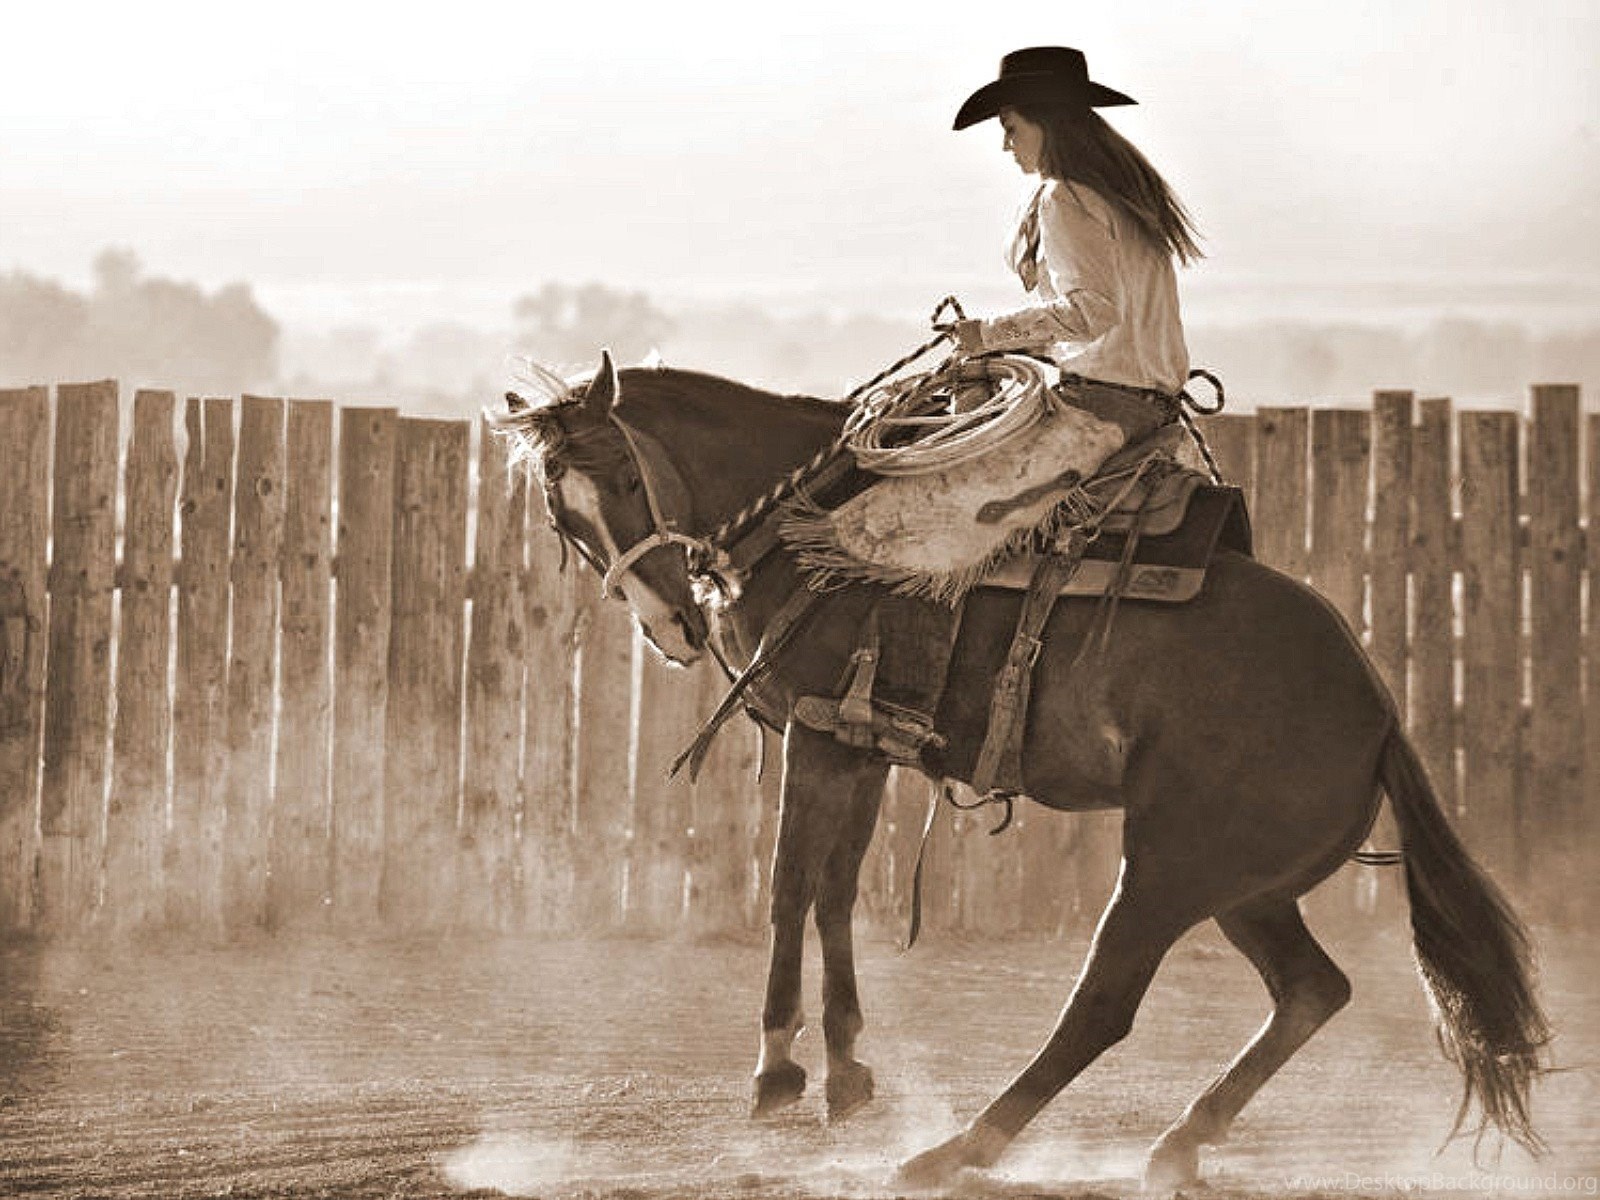 Riding front cowgirl